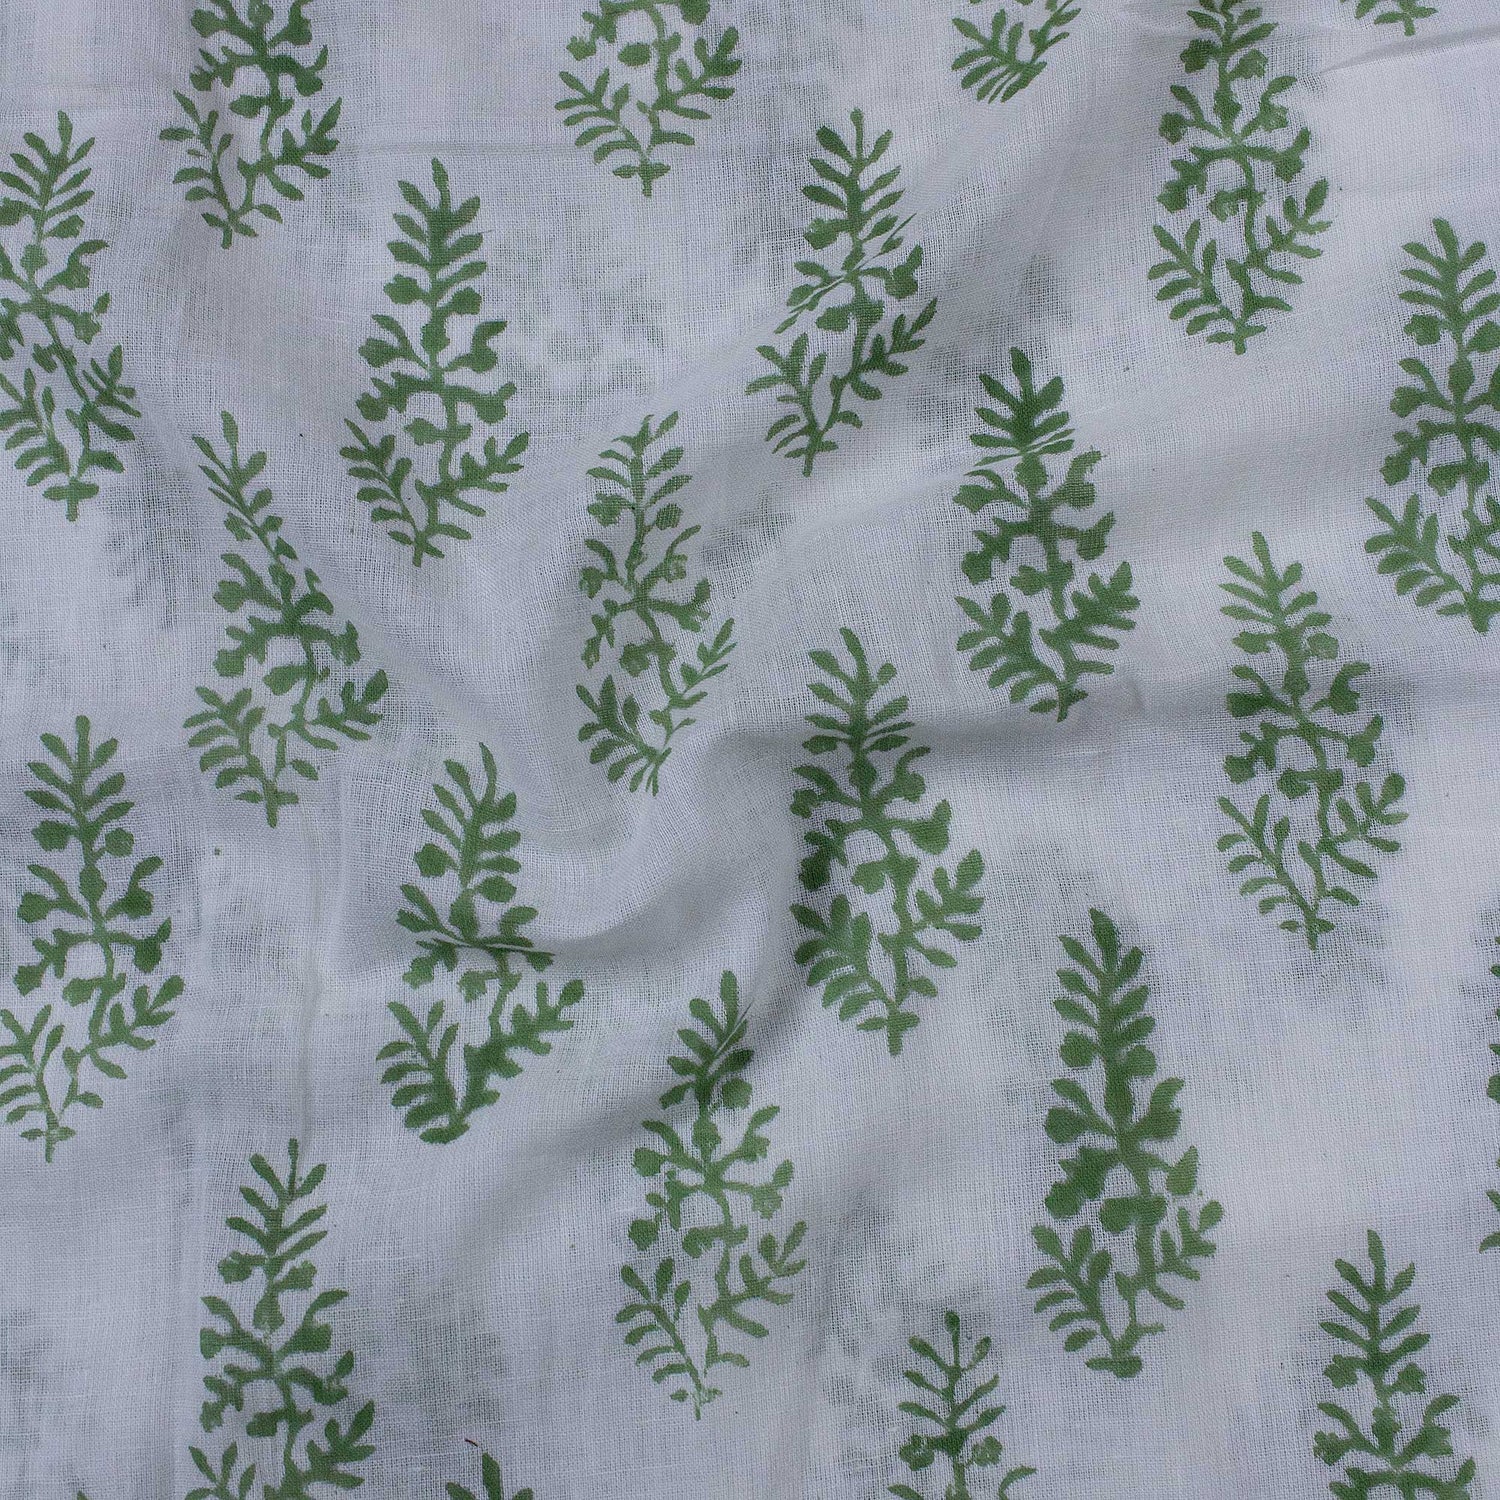 Indian Green Floral Printed Fabric